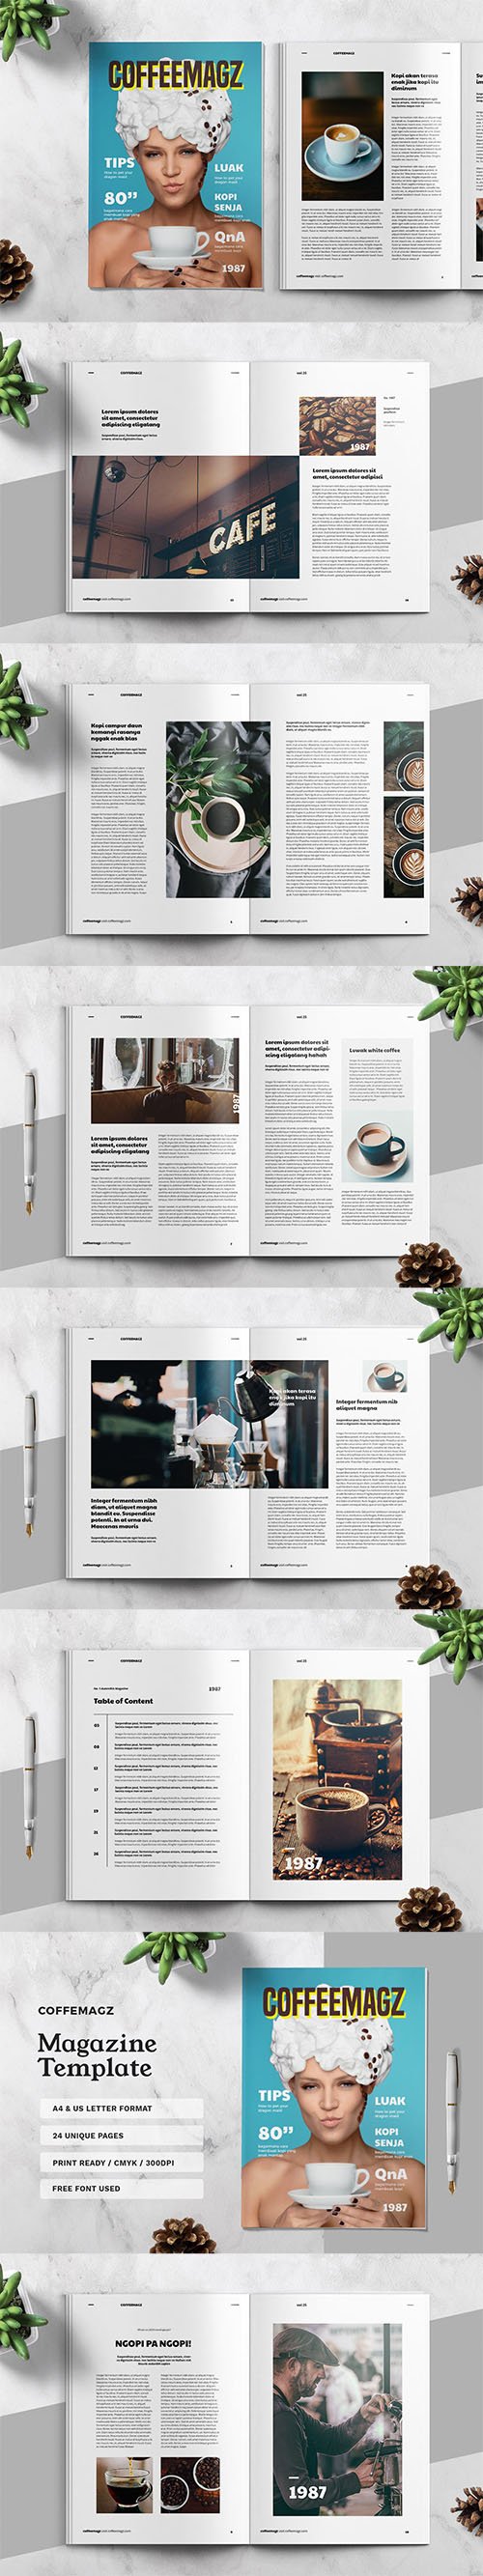 COFFEE - Magazine Template INDD